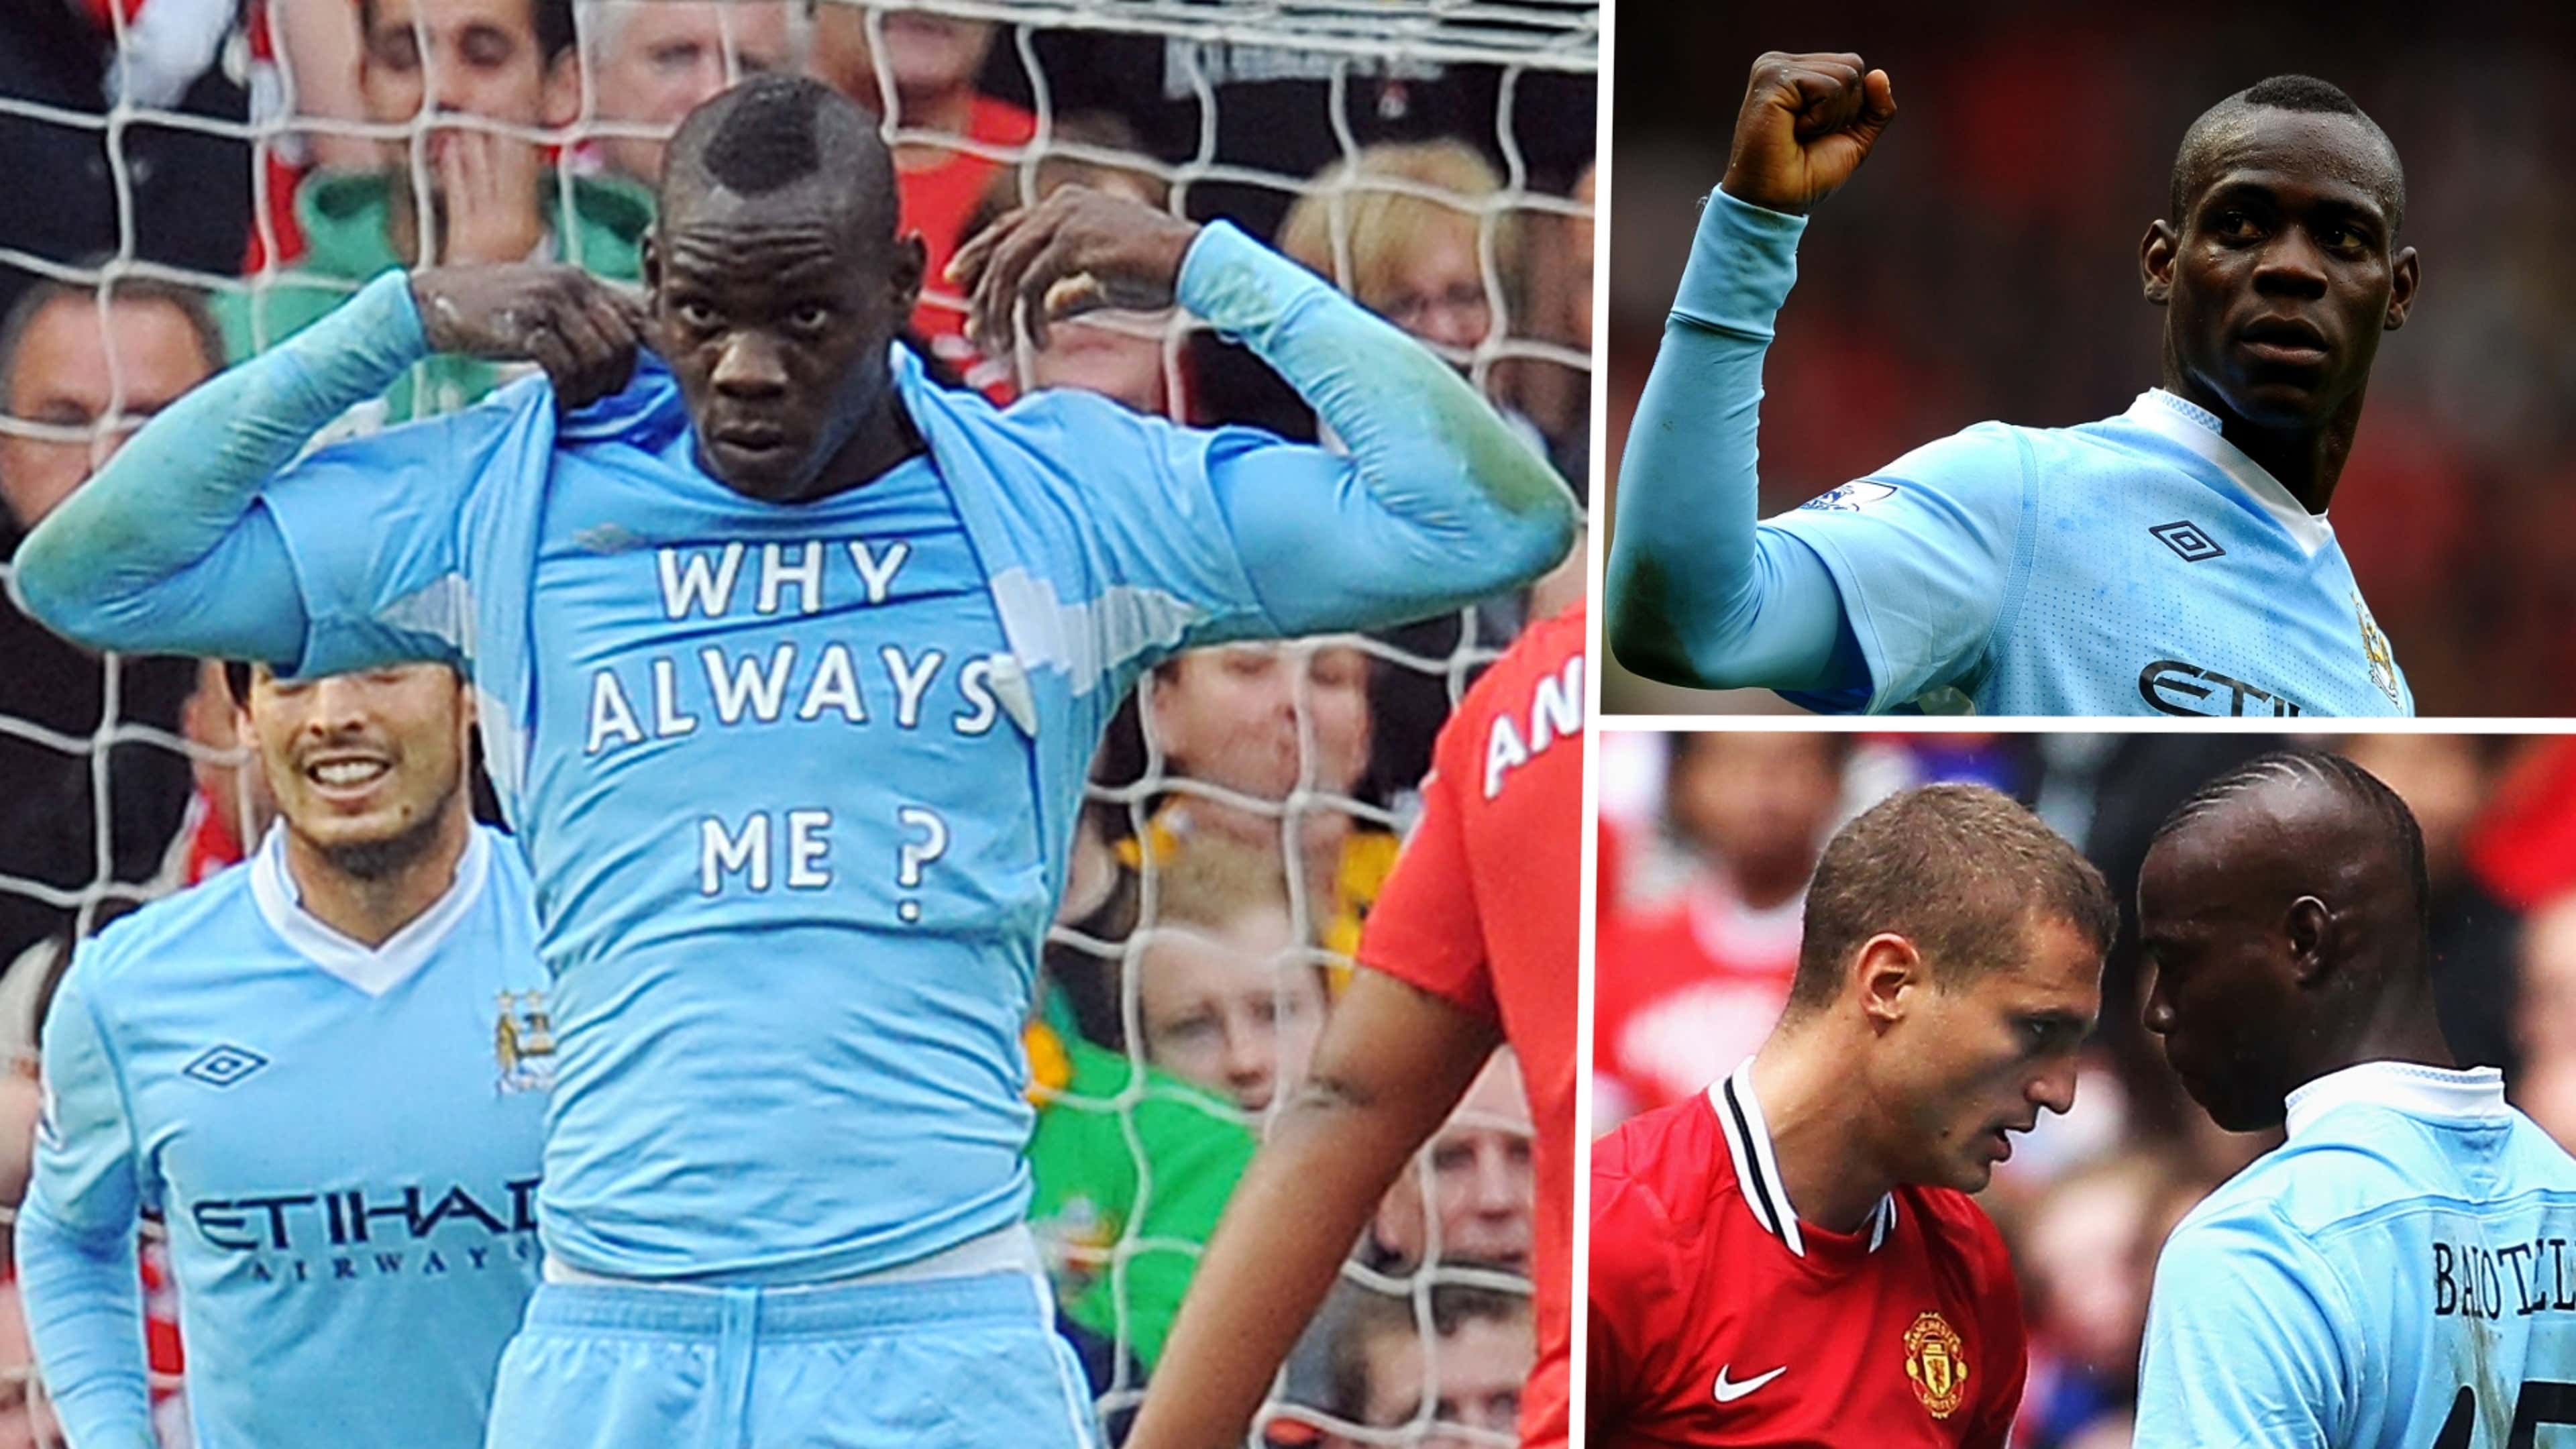 Why Always Me?' - Balotelli's famous slogan meaning and history explained